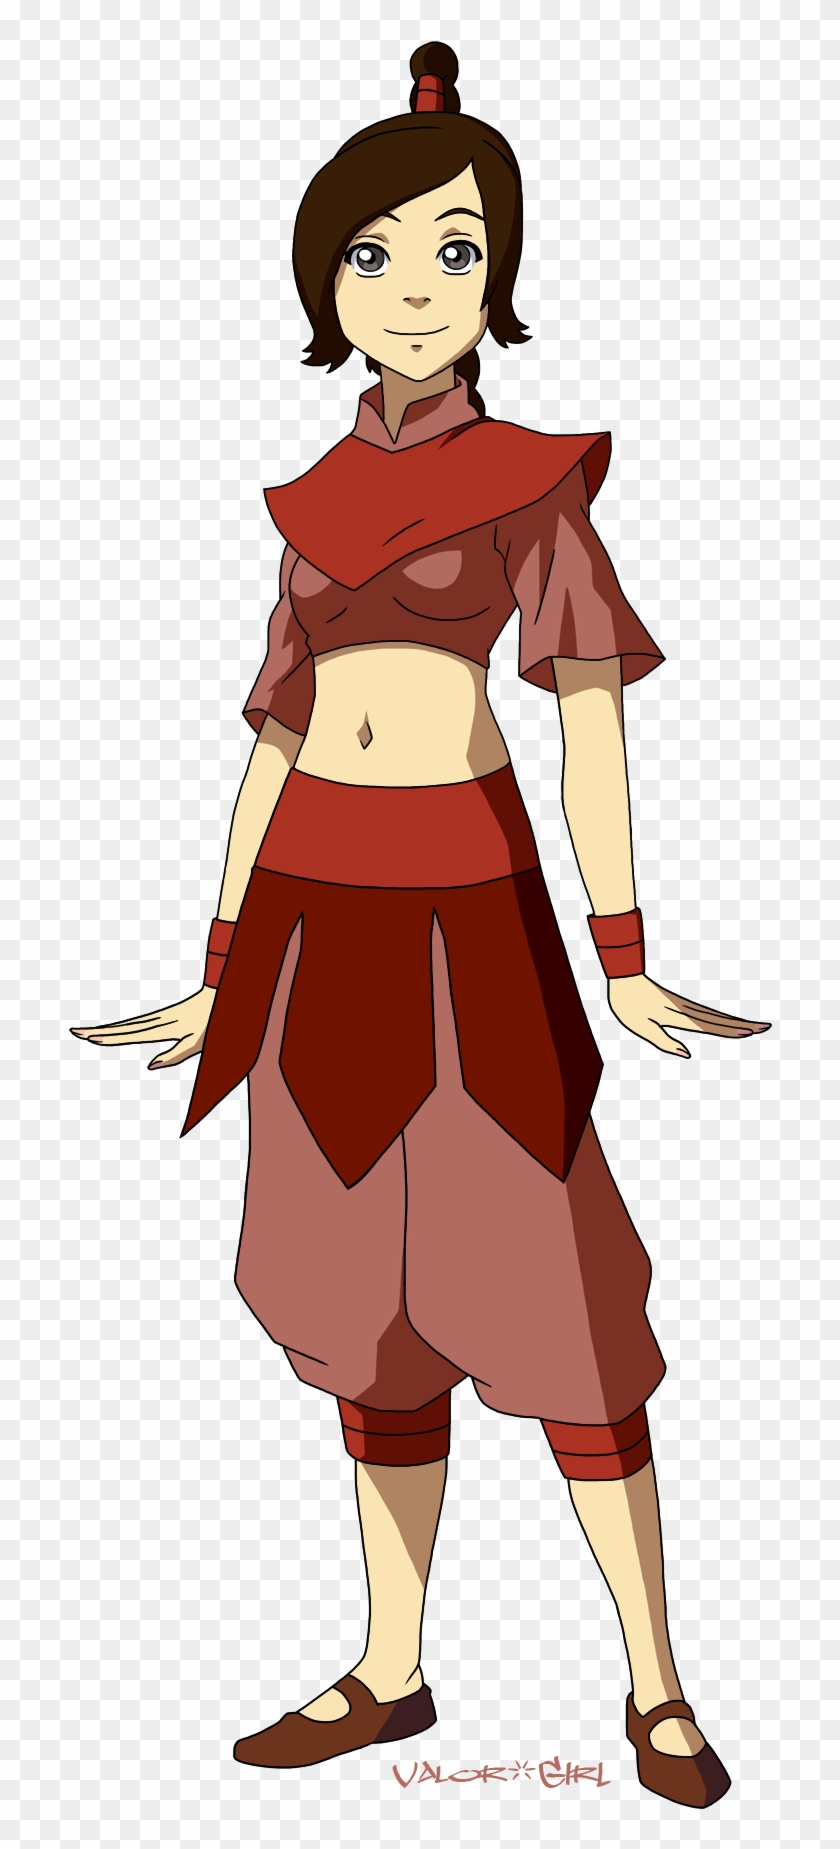 Ty Lee By Valor-girl - Avatar The Last Airbender Tylee - Free Transparent  PNG Clipart Images Download